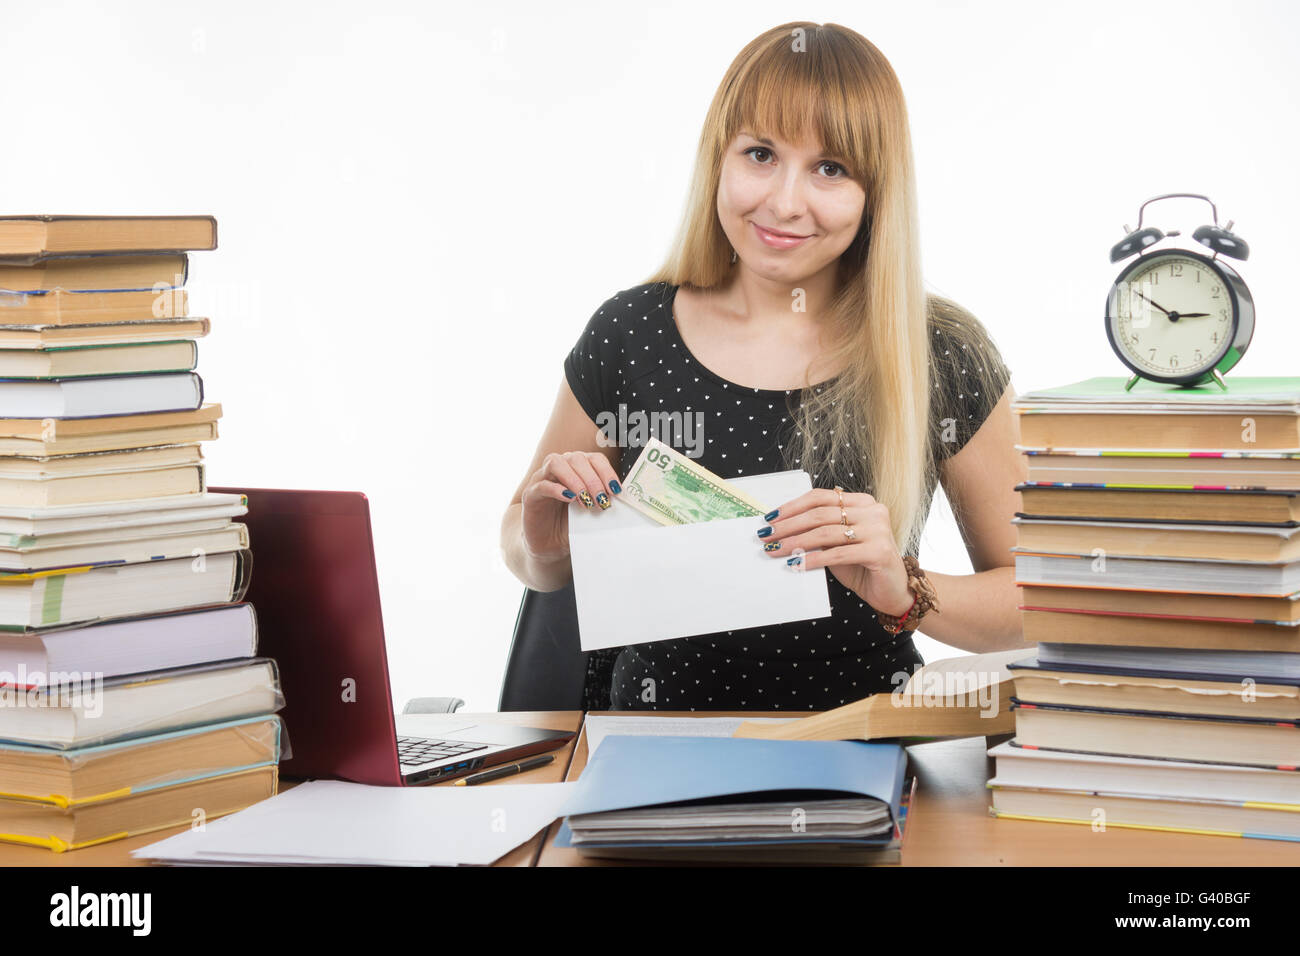 The girl puts money in an envelope to bribe the teacher in the exam, and looked into the frame Stock Photo